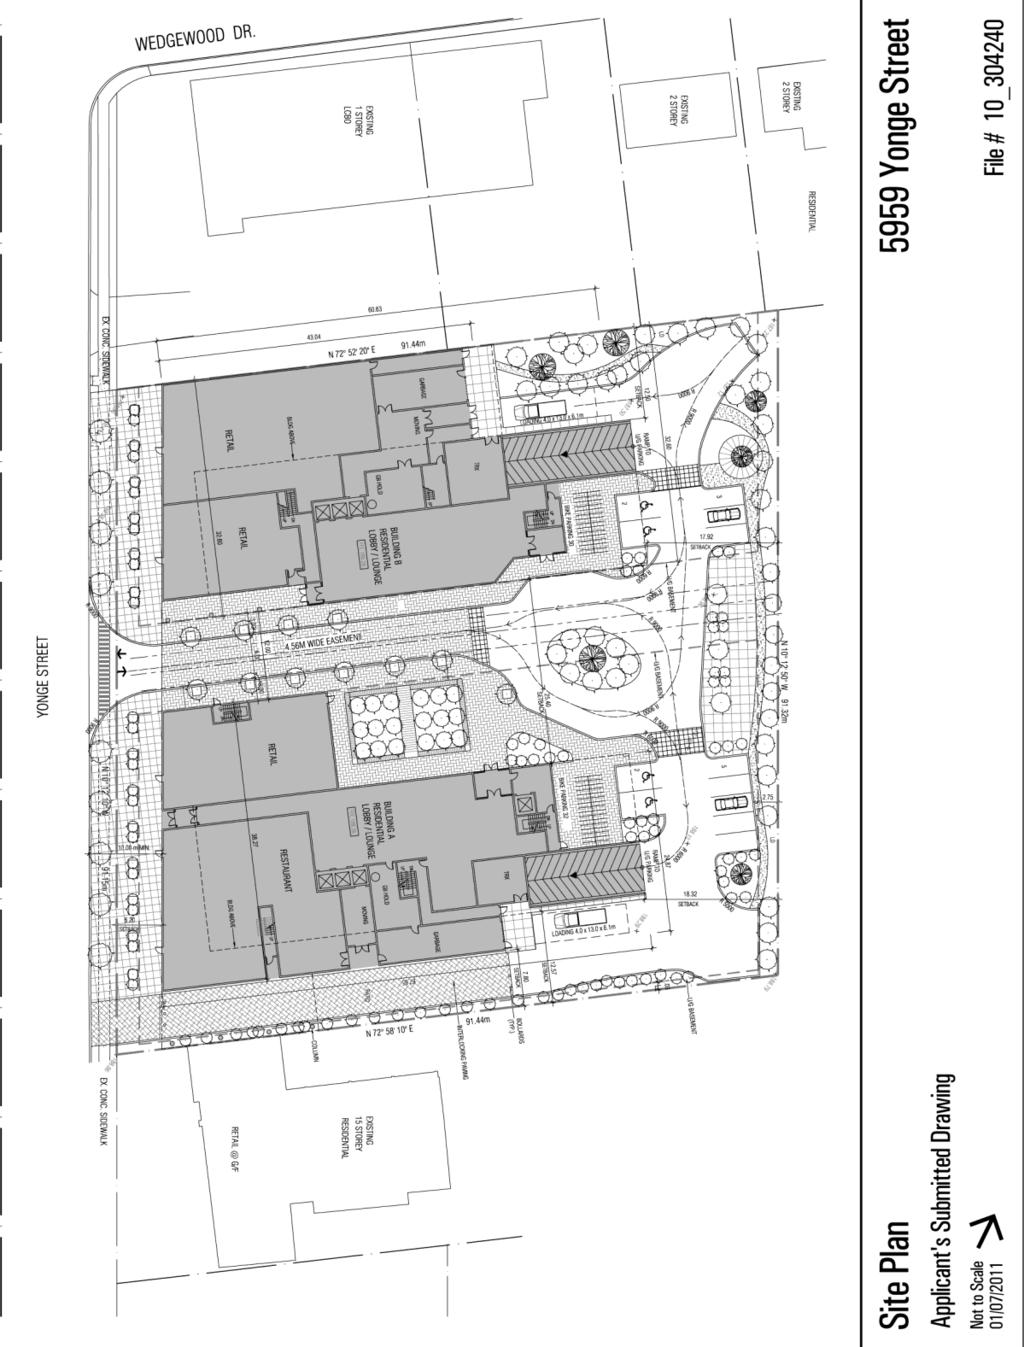 Attachment 1: Site Plan (as provided by applicant)